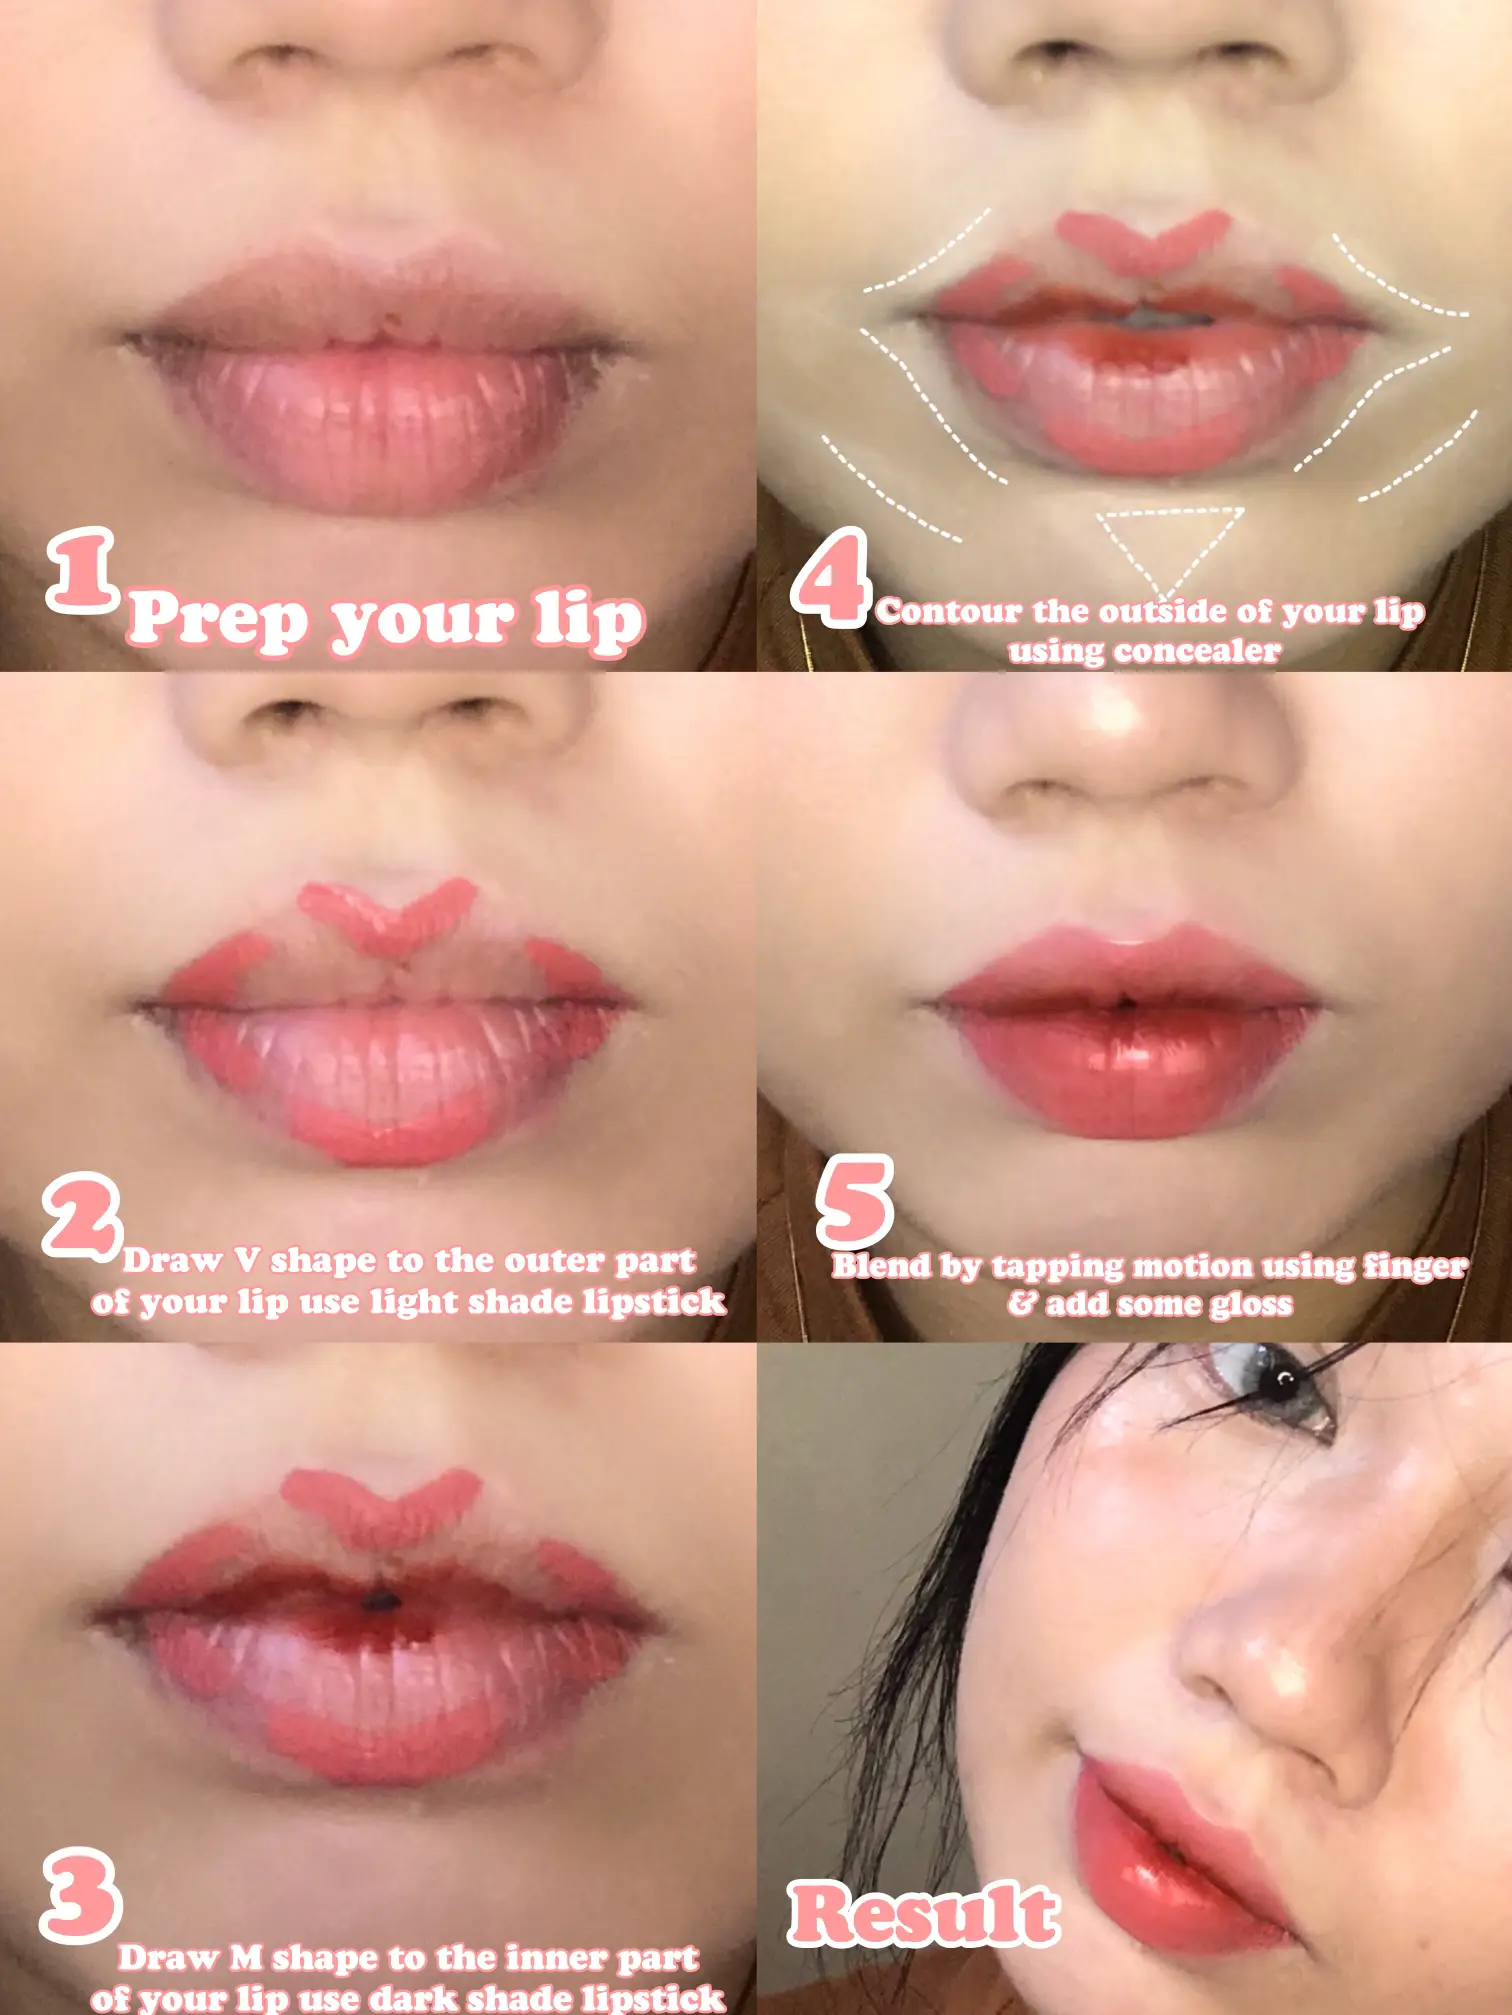 Your Guide to the Cupid's Bow Lip Filler Trend